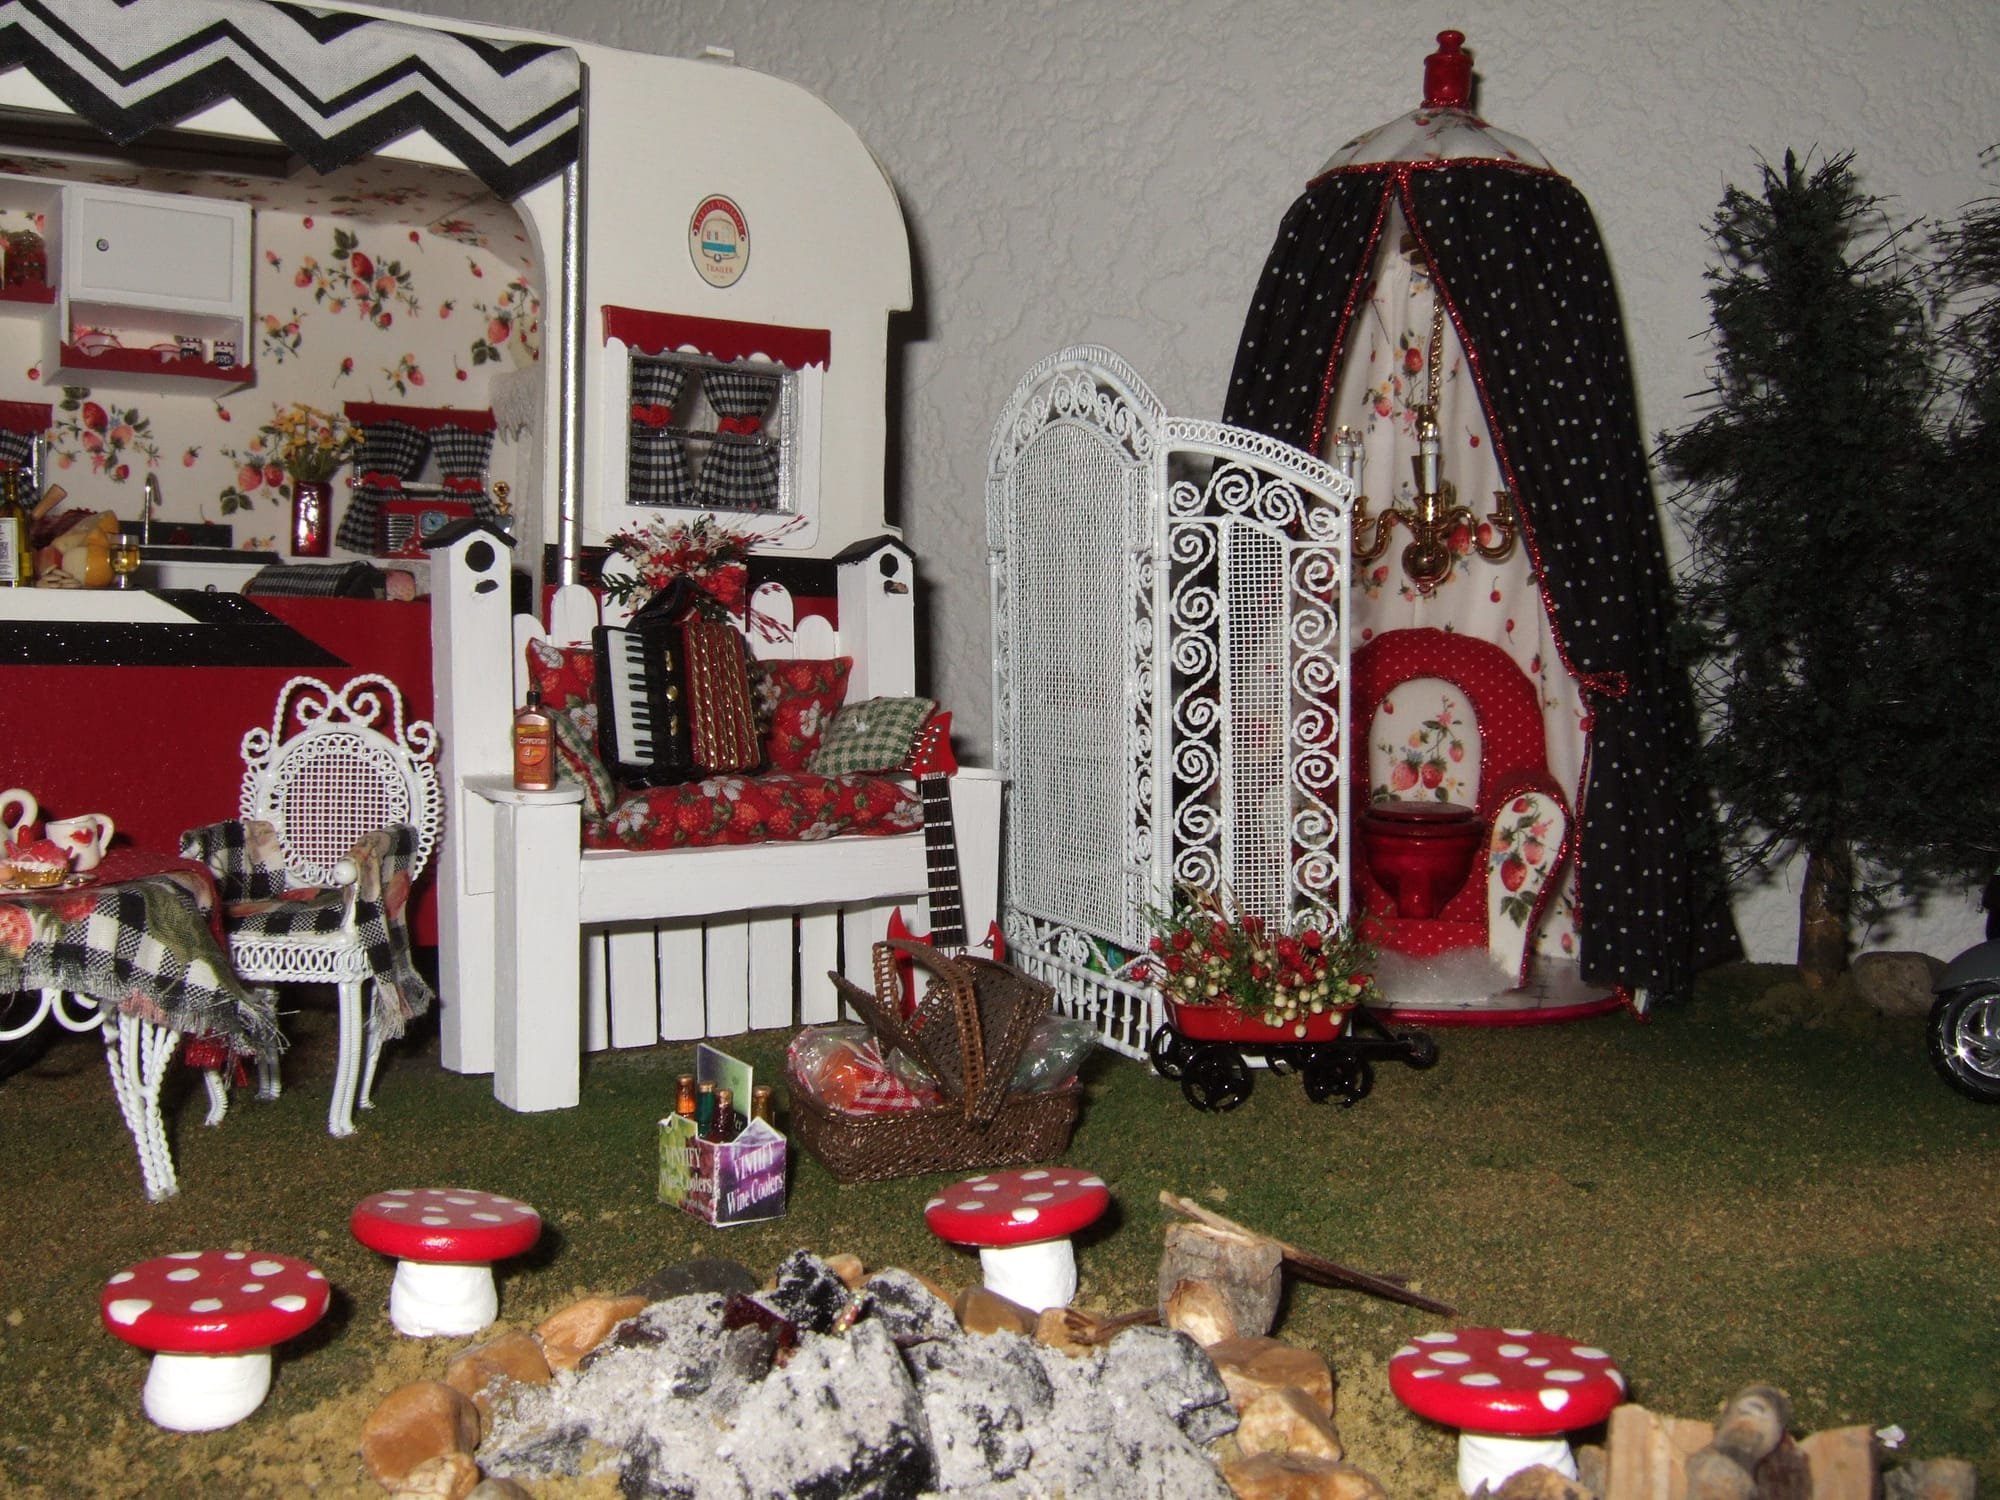 Third Place - Dollhouses